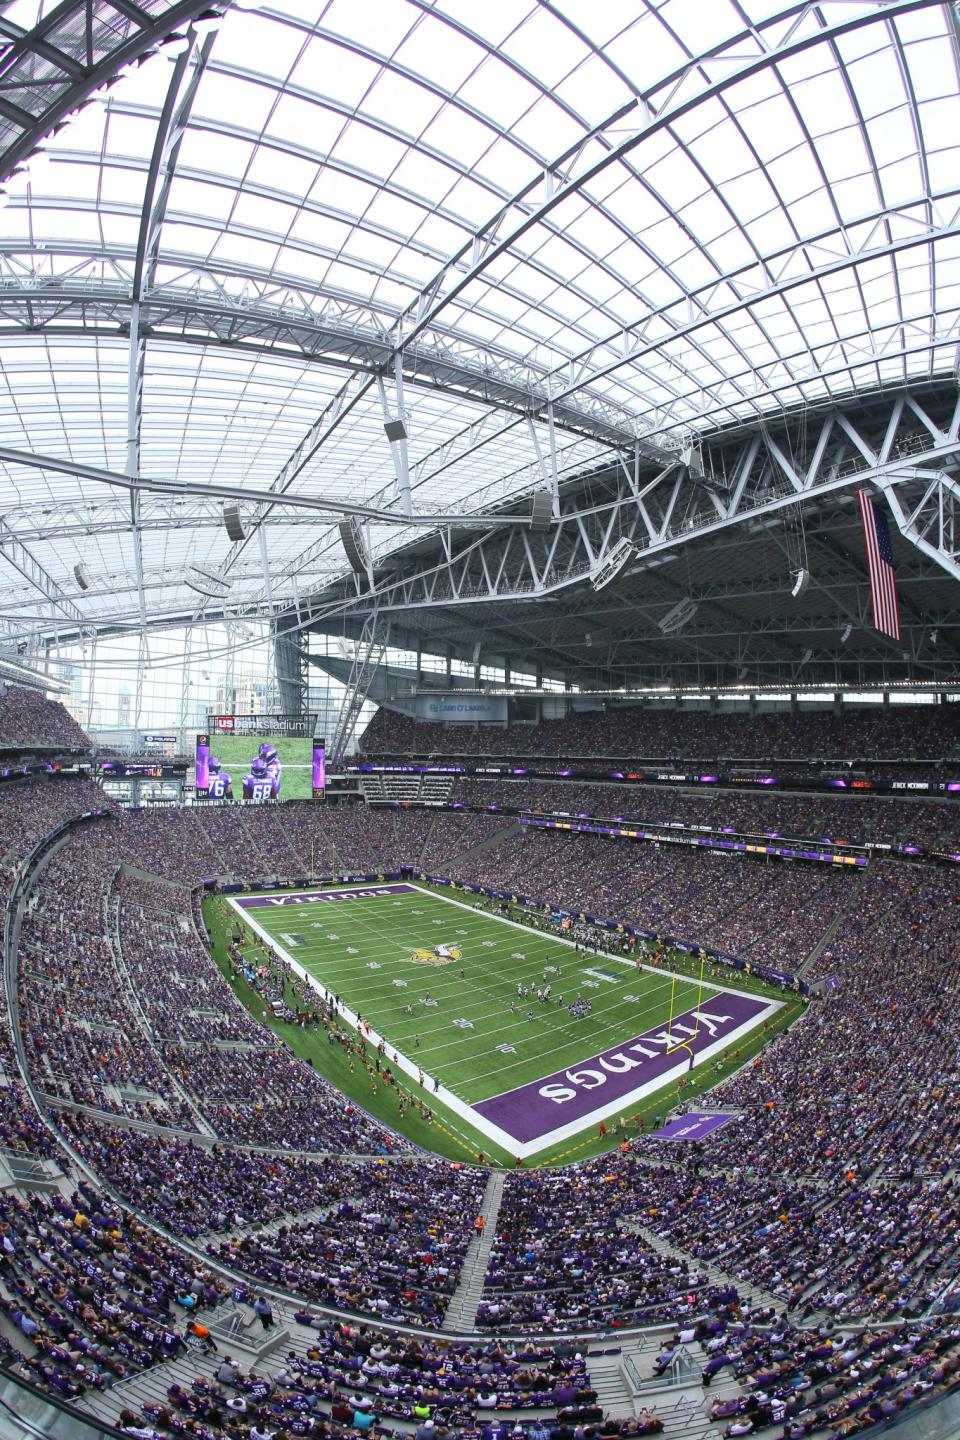 <p>General stadium view of the Minnesota Vikings against the San Diego Chargers at US Bank stadium on August 28, 2016 in Minneapolis, Minnesota. (Photo by Adam Bettcher/Getty Images) </p>